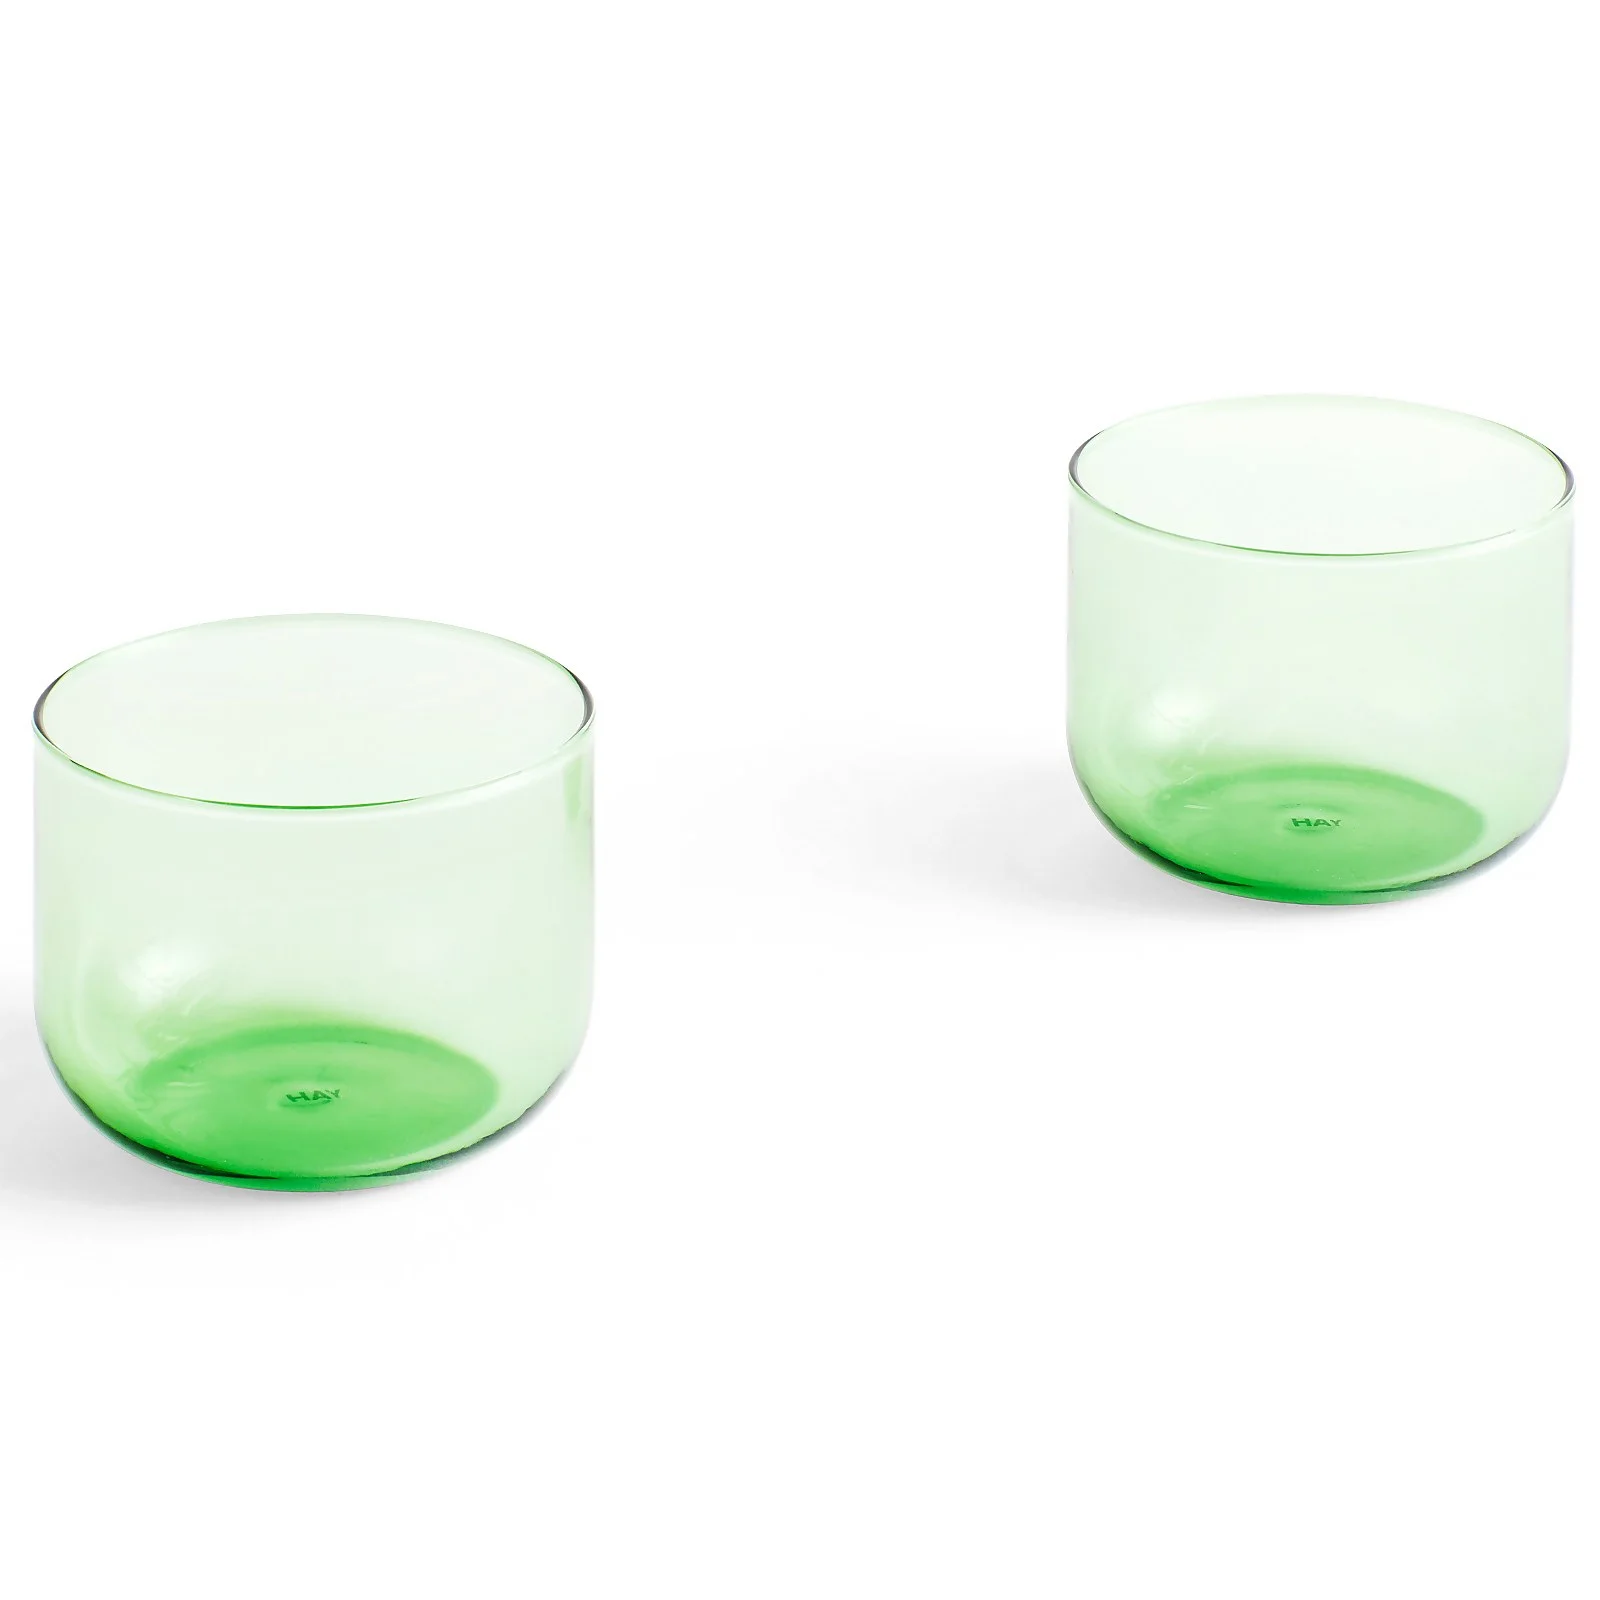 HAY Tint Glass - Green (Set of 2) Image 1